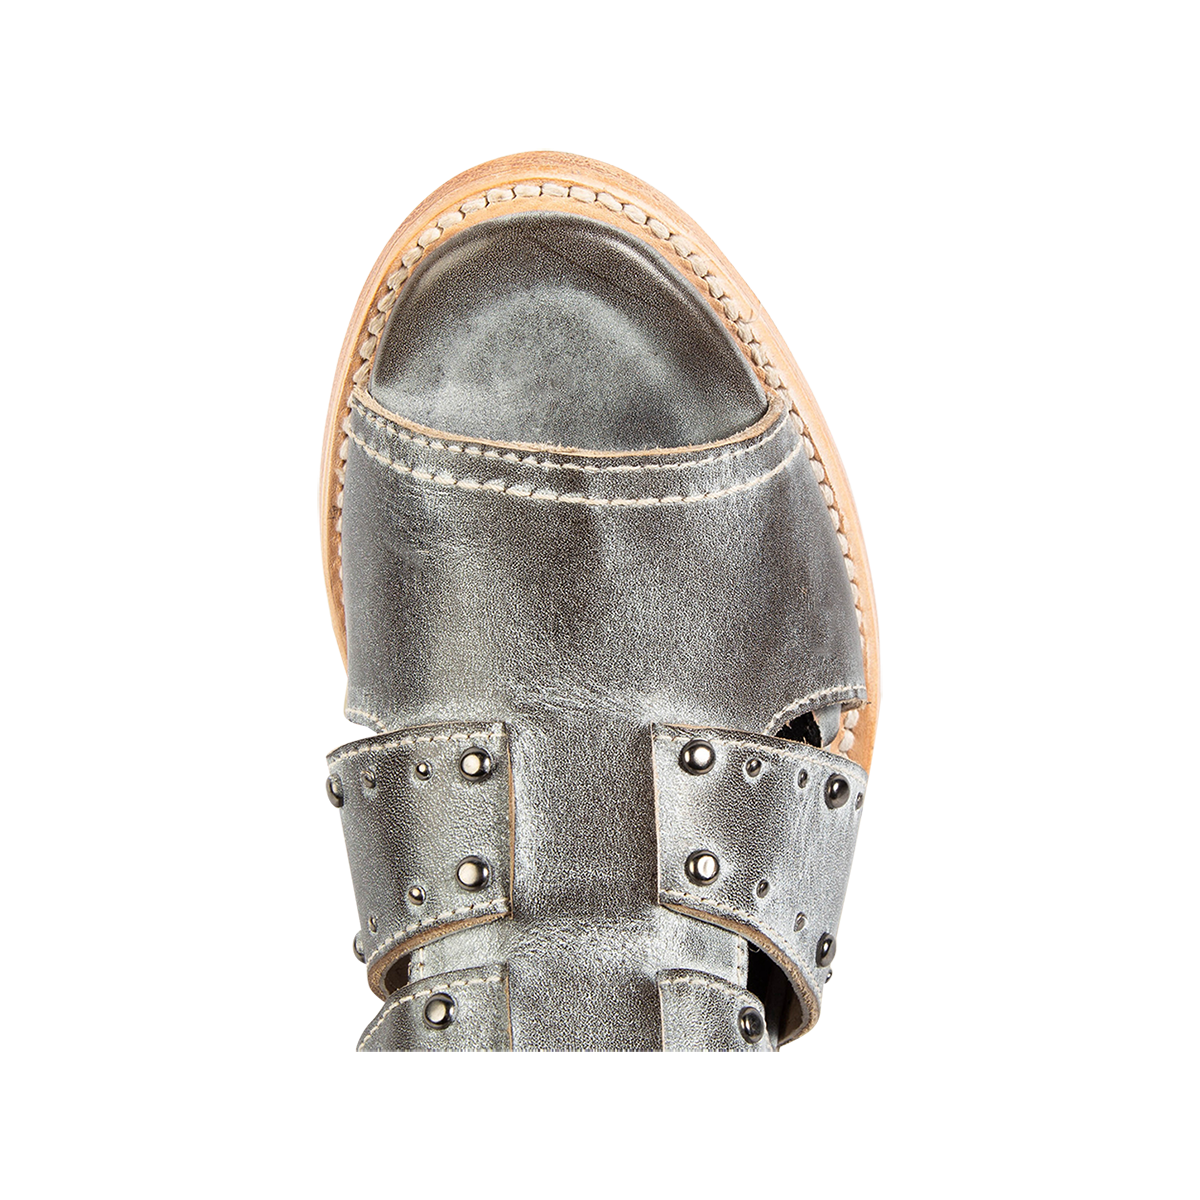 Top view showing a rounded toe and metal embellishments on FREEBIRD women's Ghost ice leather sandal